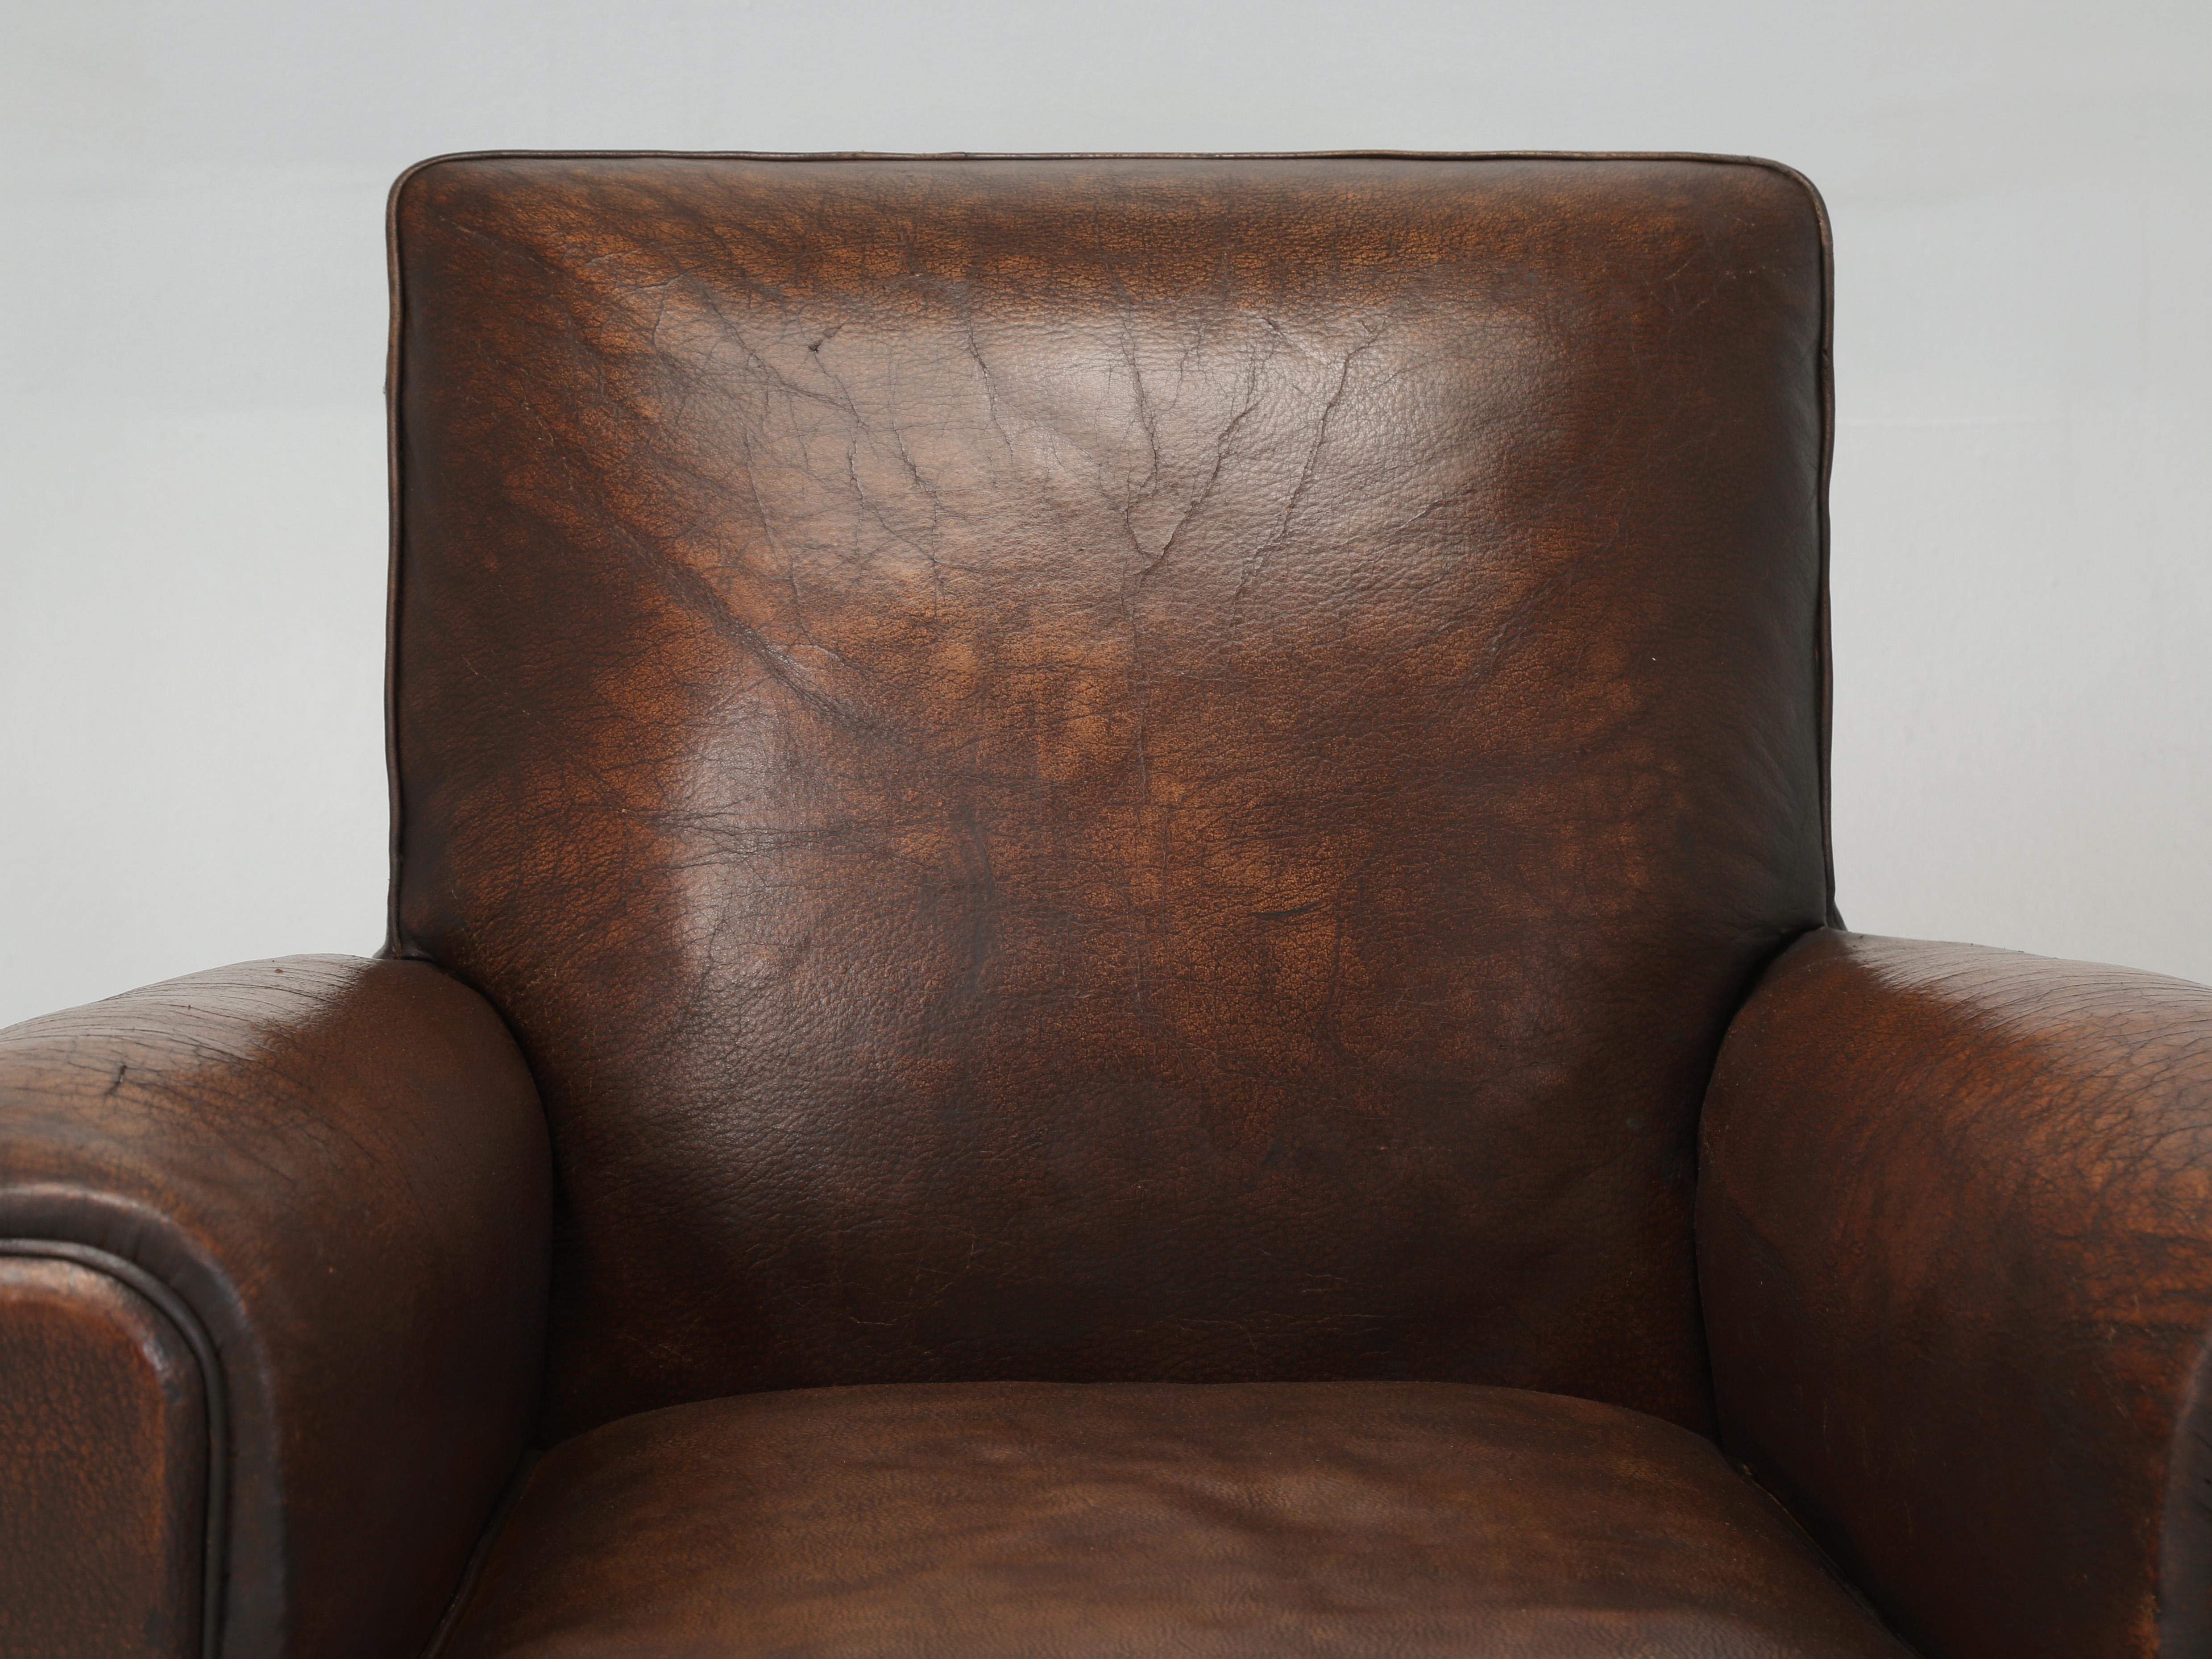 Vintage Leather Club Chair that our Old Plank Upholstery Department restored from the inside out, while leaving the Original Leather unrestored. One might call this a conservation process, rather than a restoration. Our main objective was to make